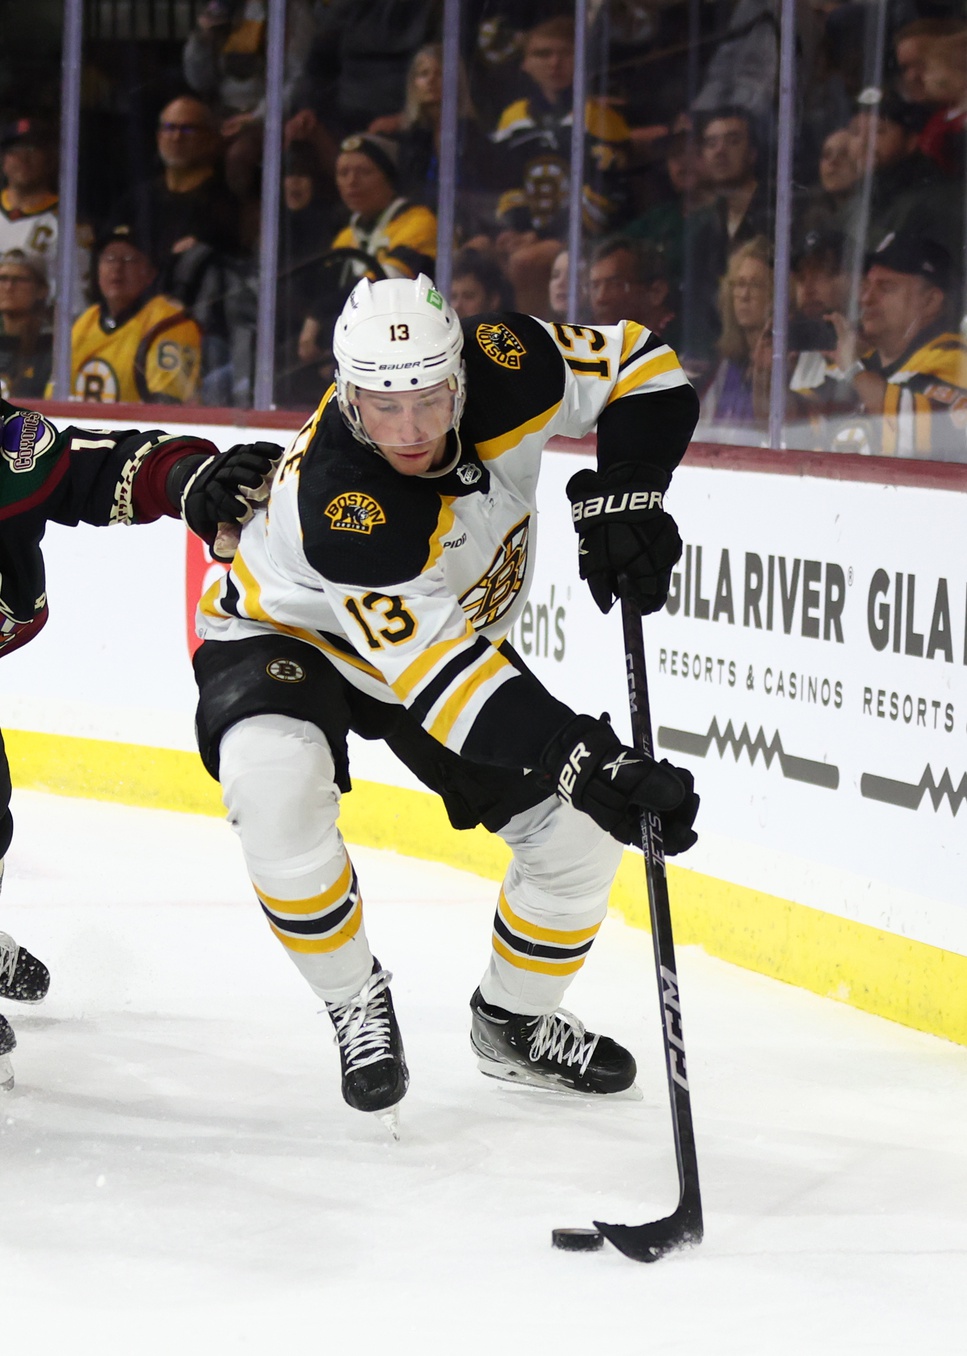 Flames claim forward A.J. Greer off waivers from Bruins